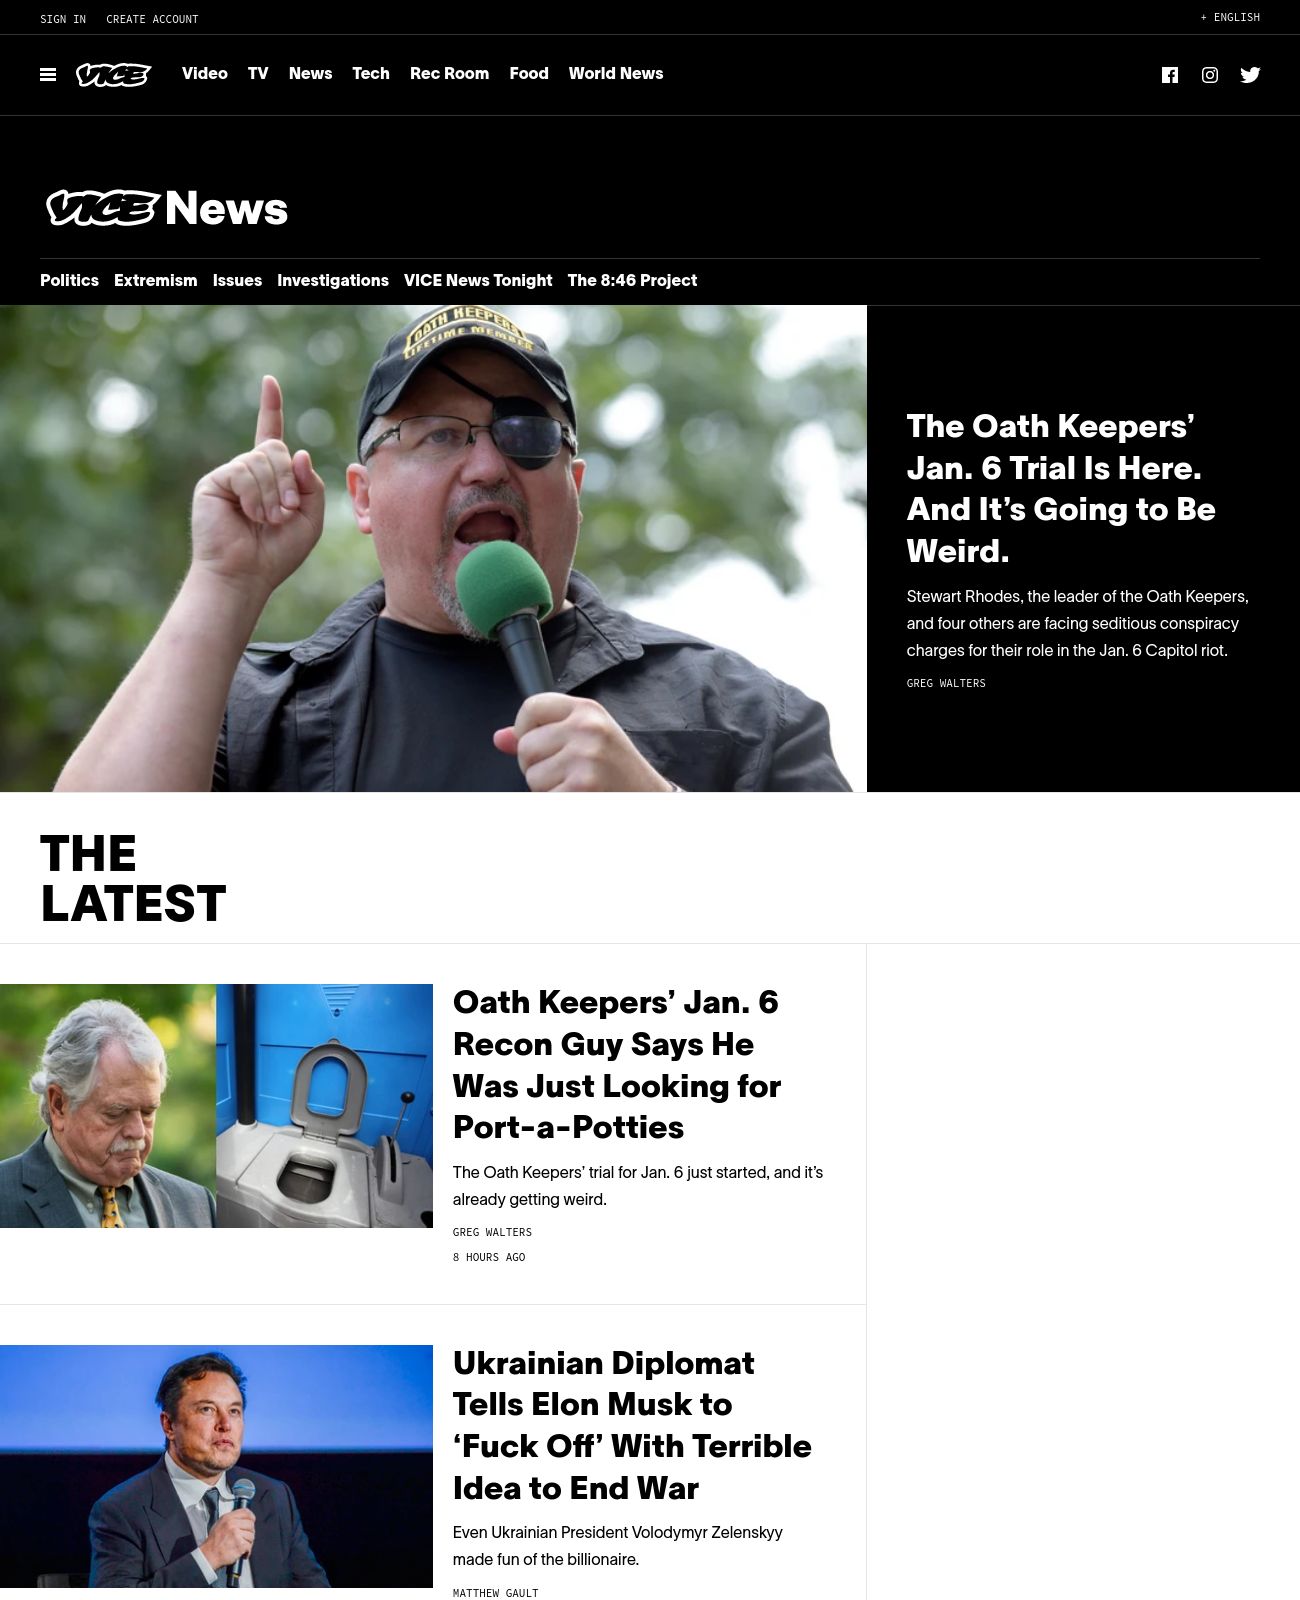 Vice News at 2022-10-04 01:20:58-04:00 local time